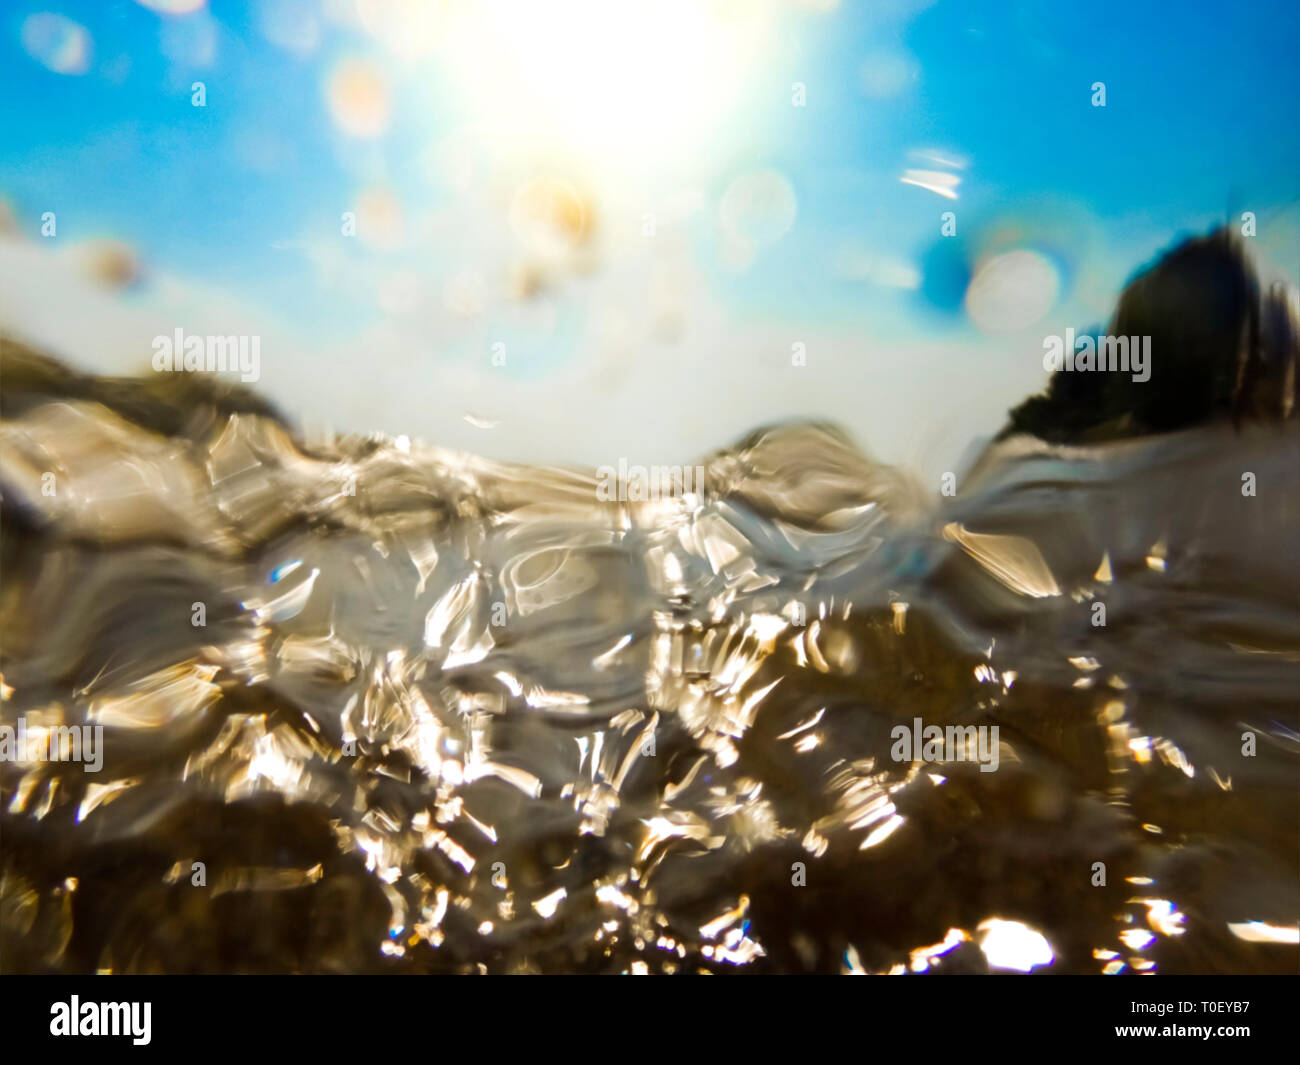 Blurred ocean wave half underwater - Out of focus sea wave underwater crushing on camera lens - Abstract background of salt water Stock Photo